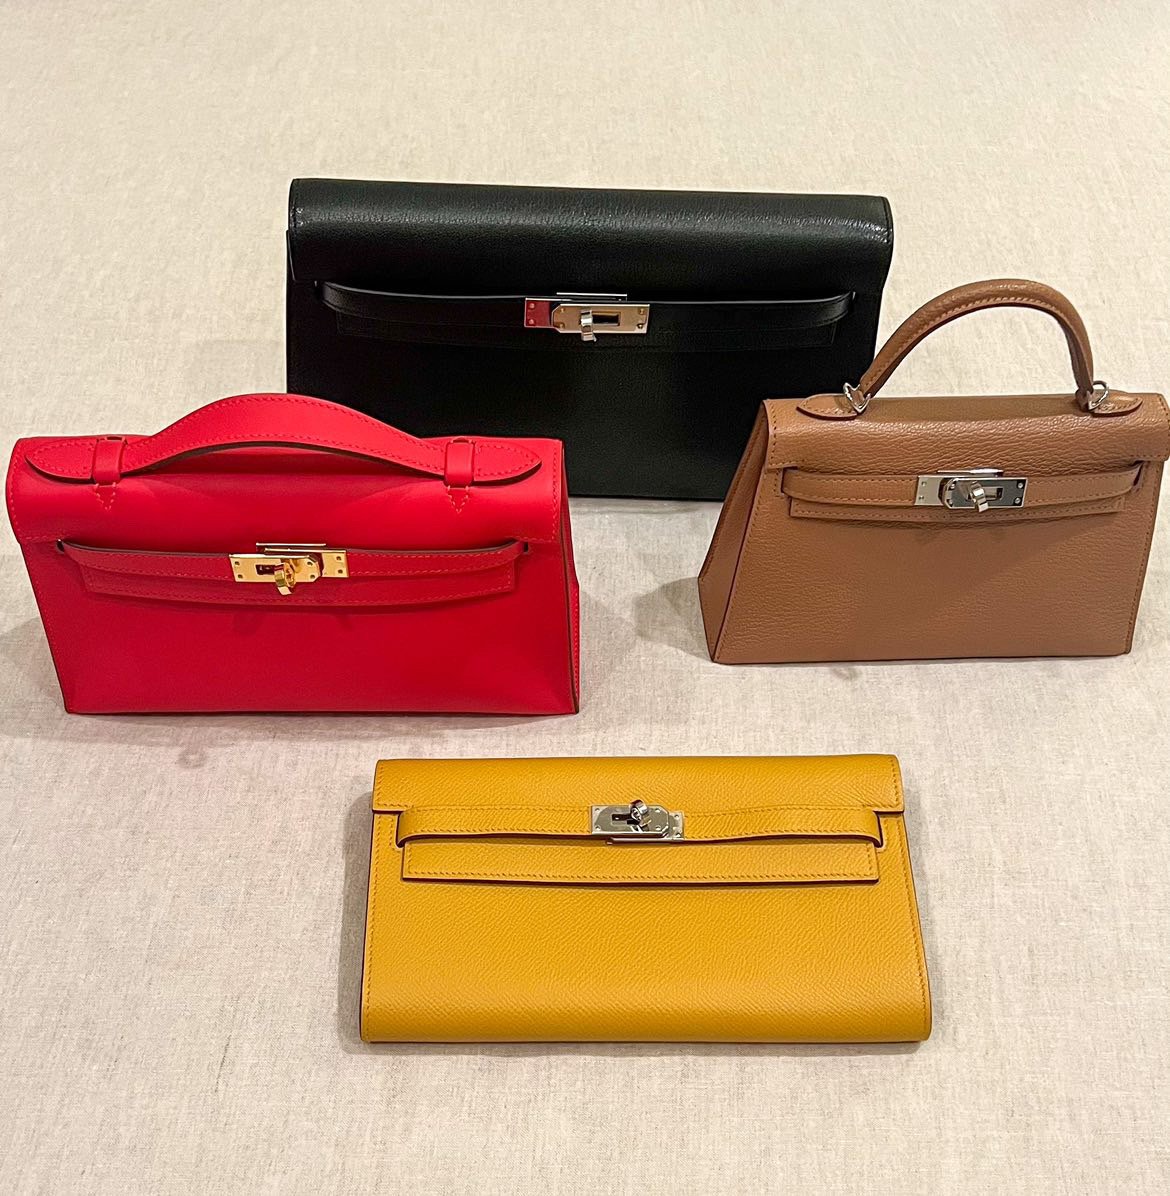 Hermès Reveal & Review: Would You Choose a Kelly Pochette or Kelly